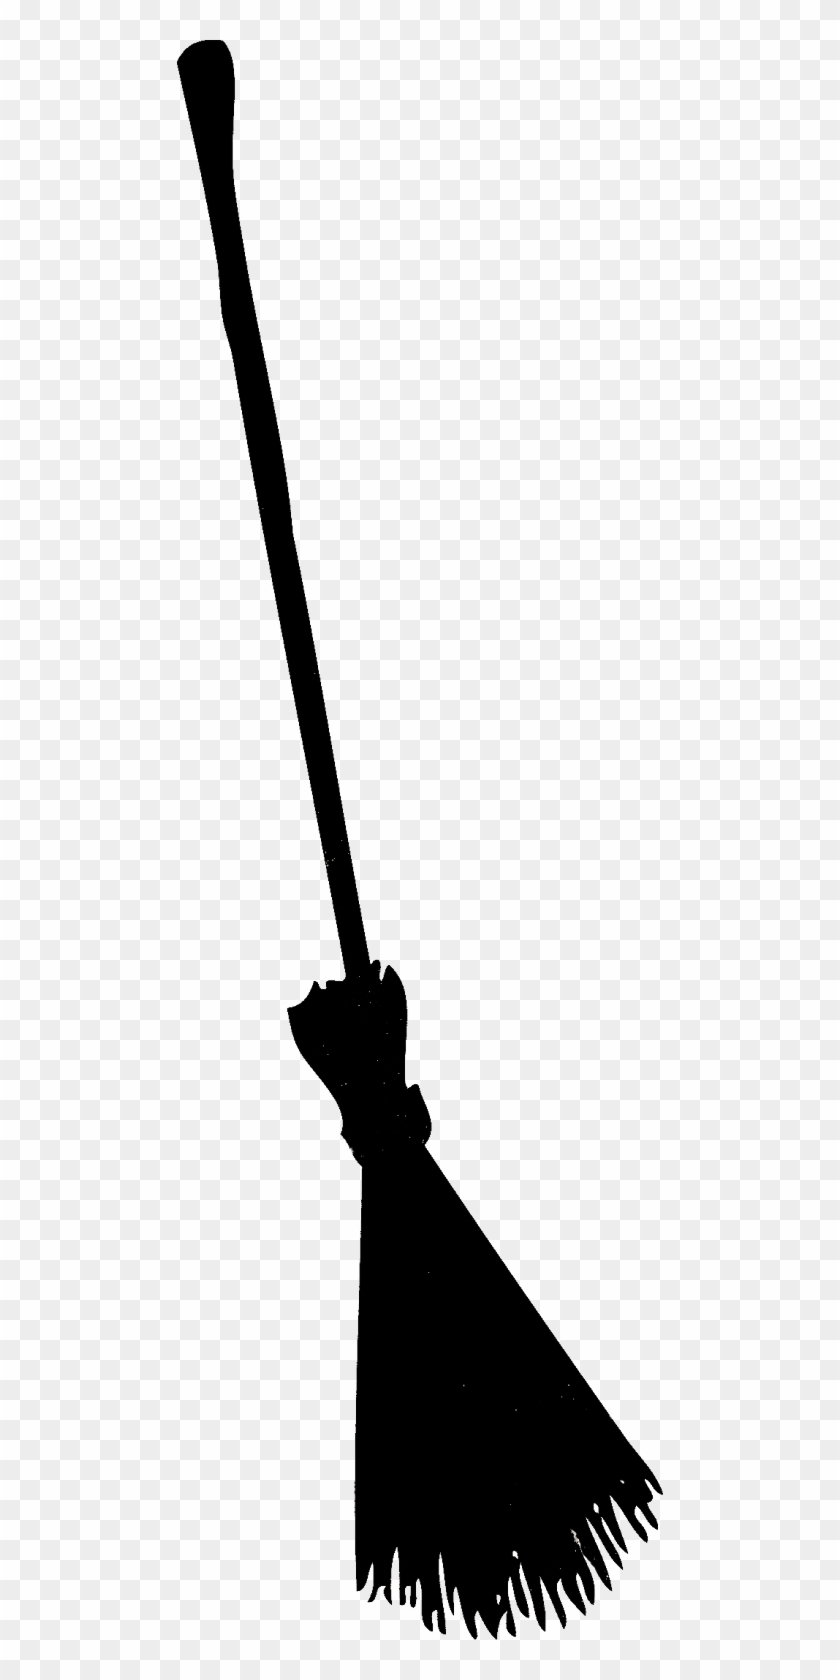 Clipart Royalty Free Stock Warehouse Silhouette At - Witch Broom Silhouette Png Transparent Png #286849